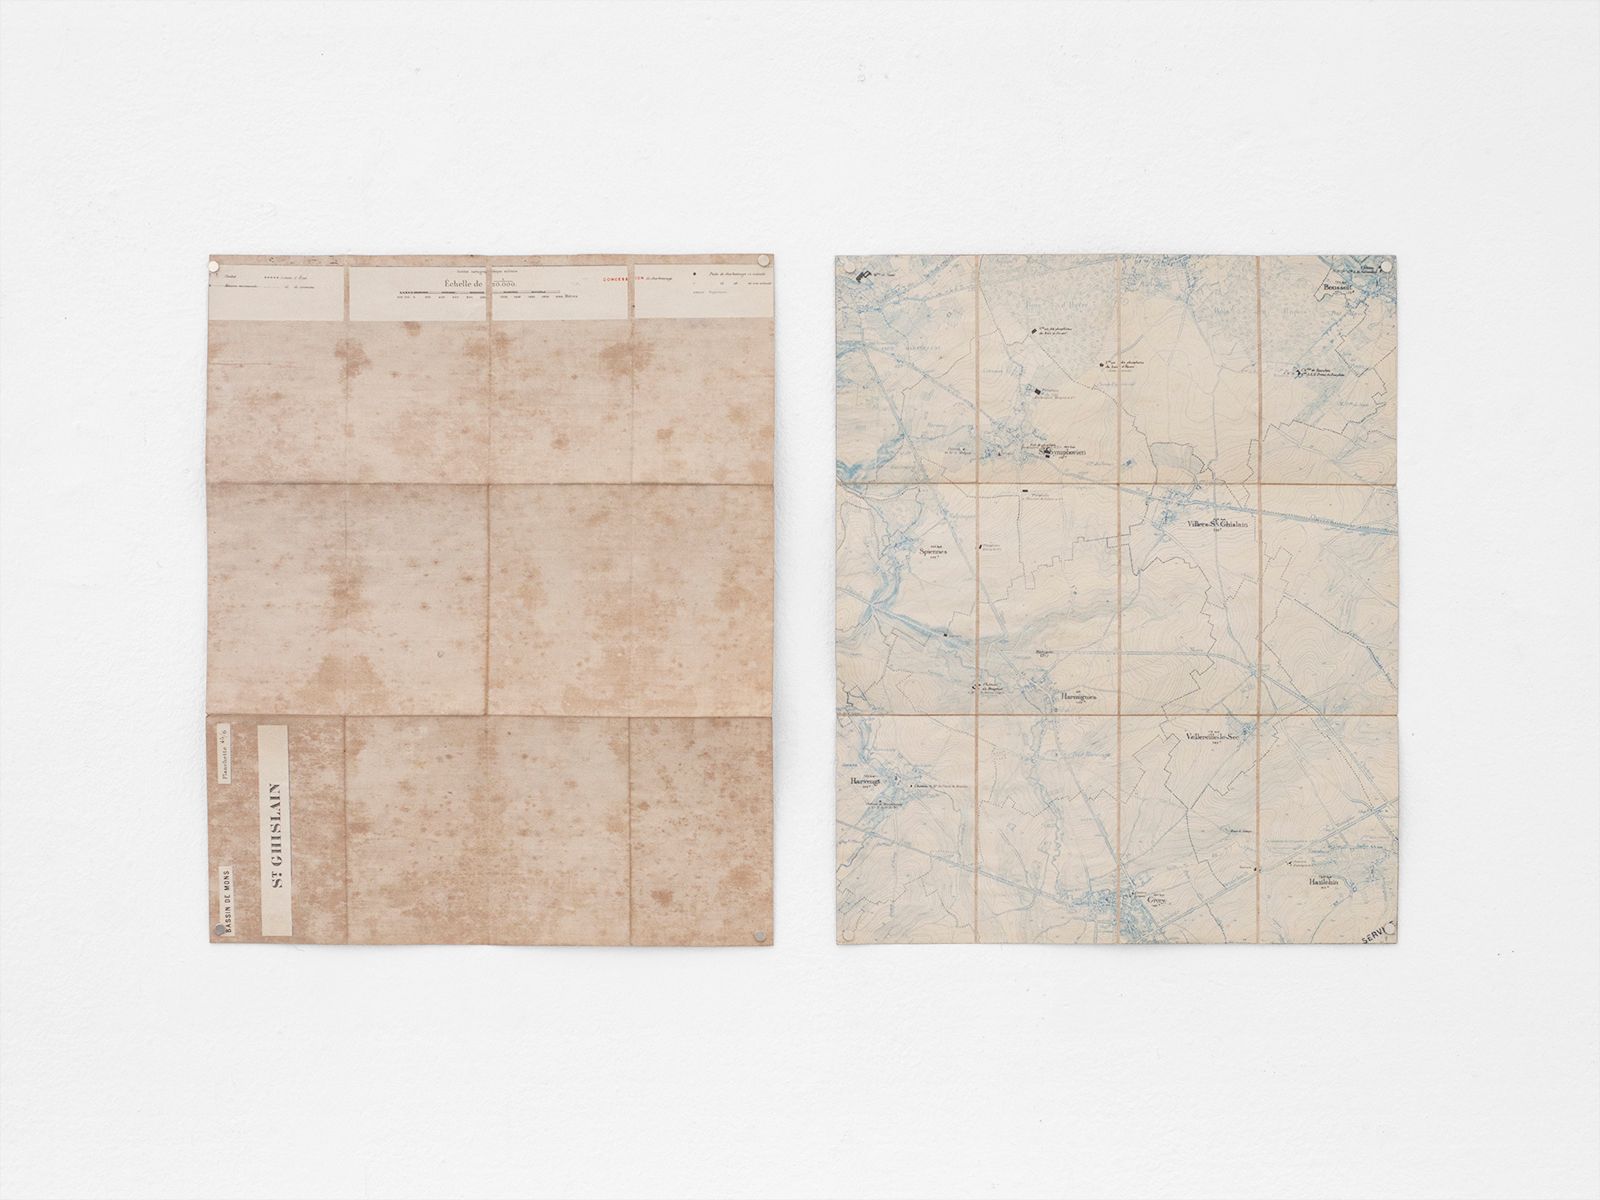 © Esther Hovers - Structures, 2016 - Ongoing 50 x 40 cm / 19.7 x 15.7 in. Found maps of Belgium, date unknown, paper glued on linen.